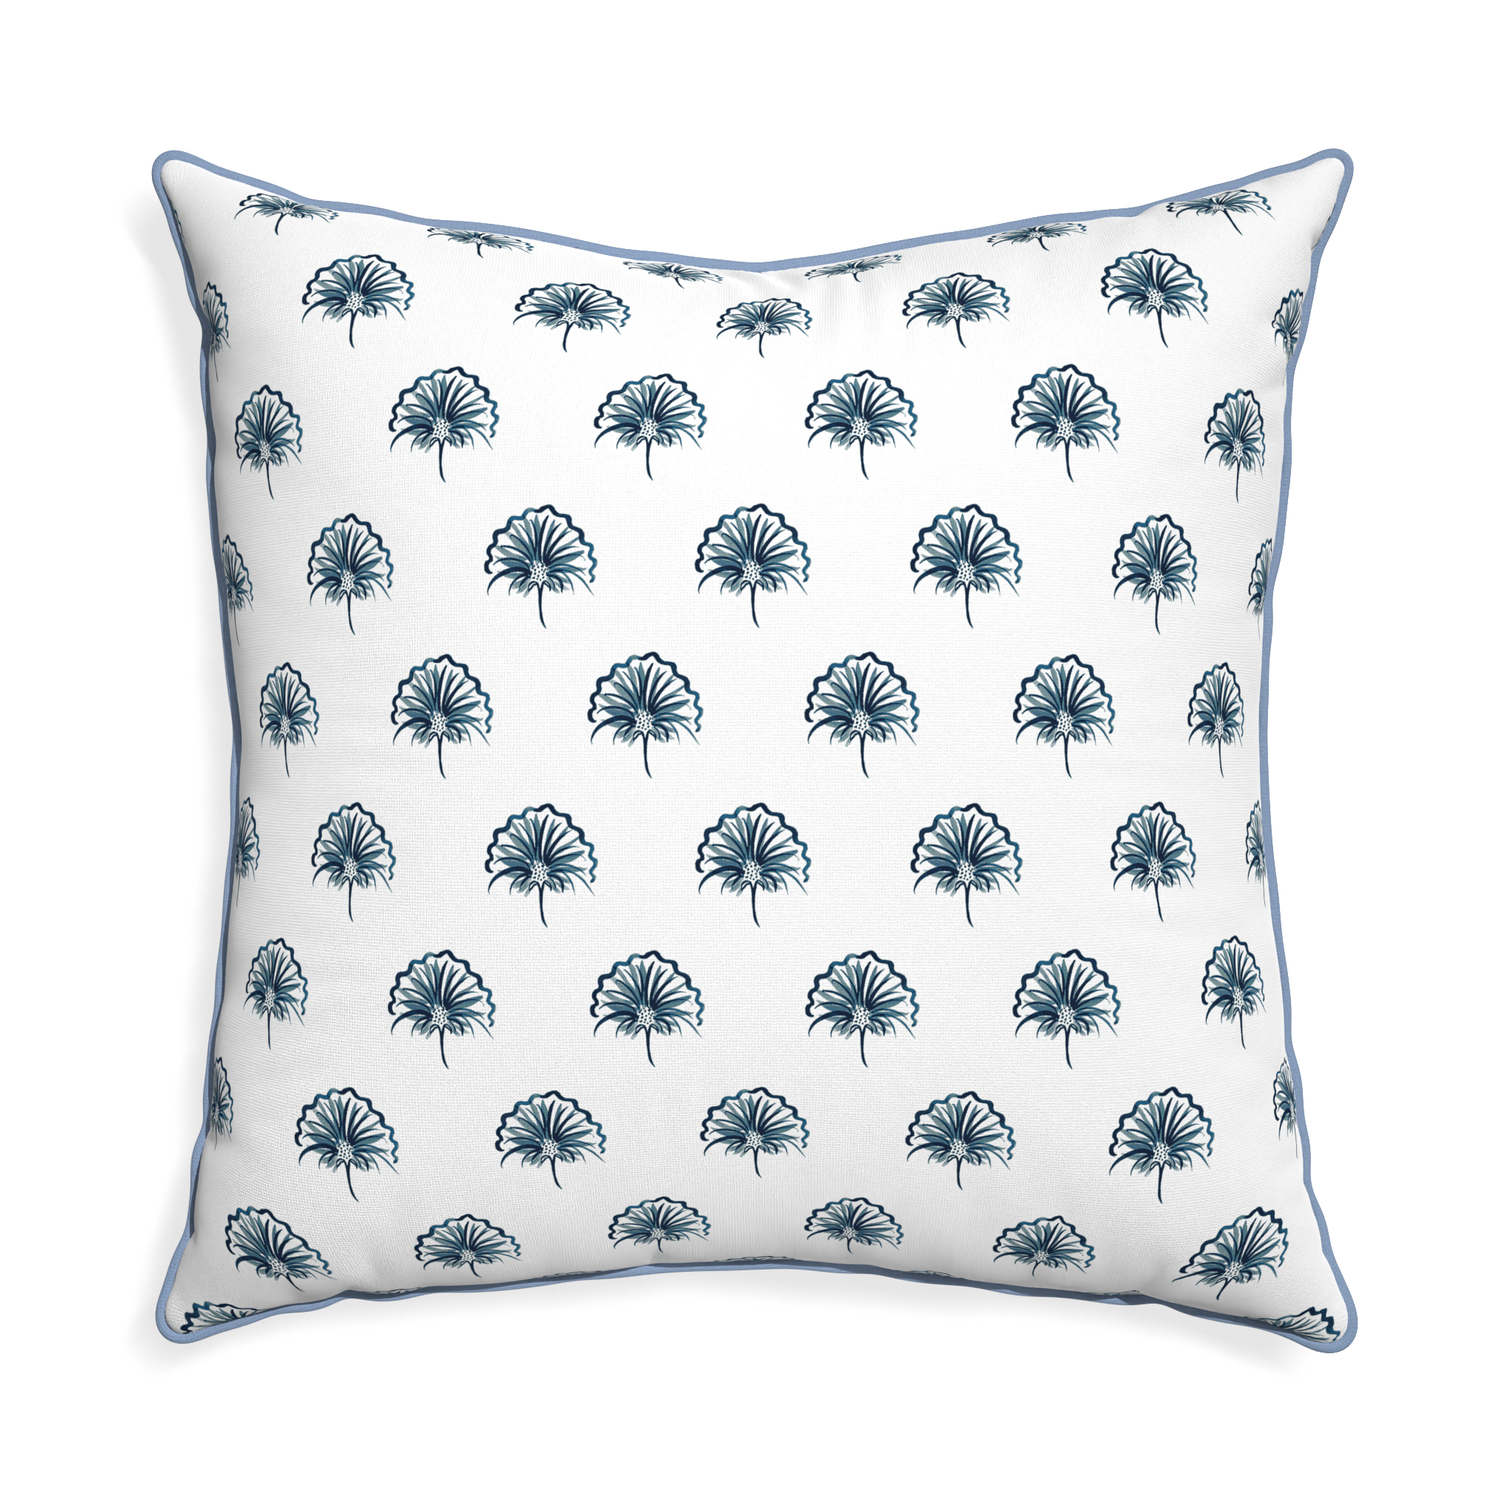 Euro-sham penelope midnight custom floral navypillow with sky piping on white background